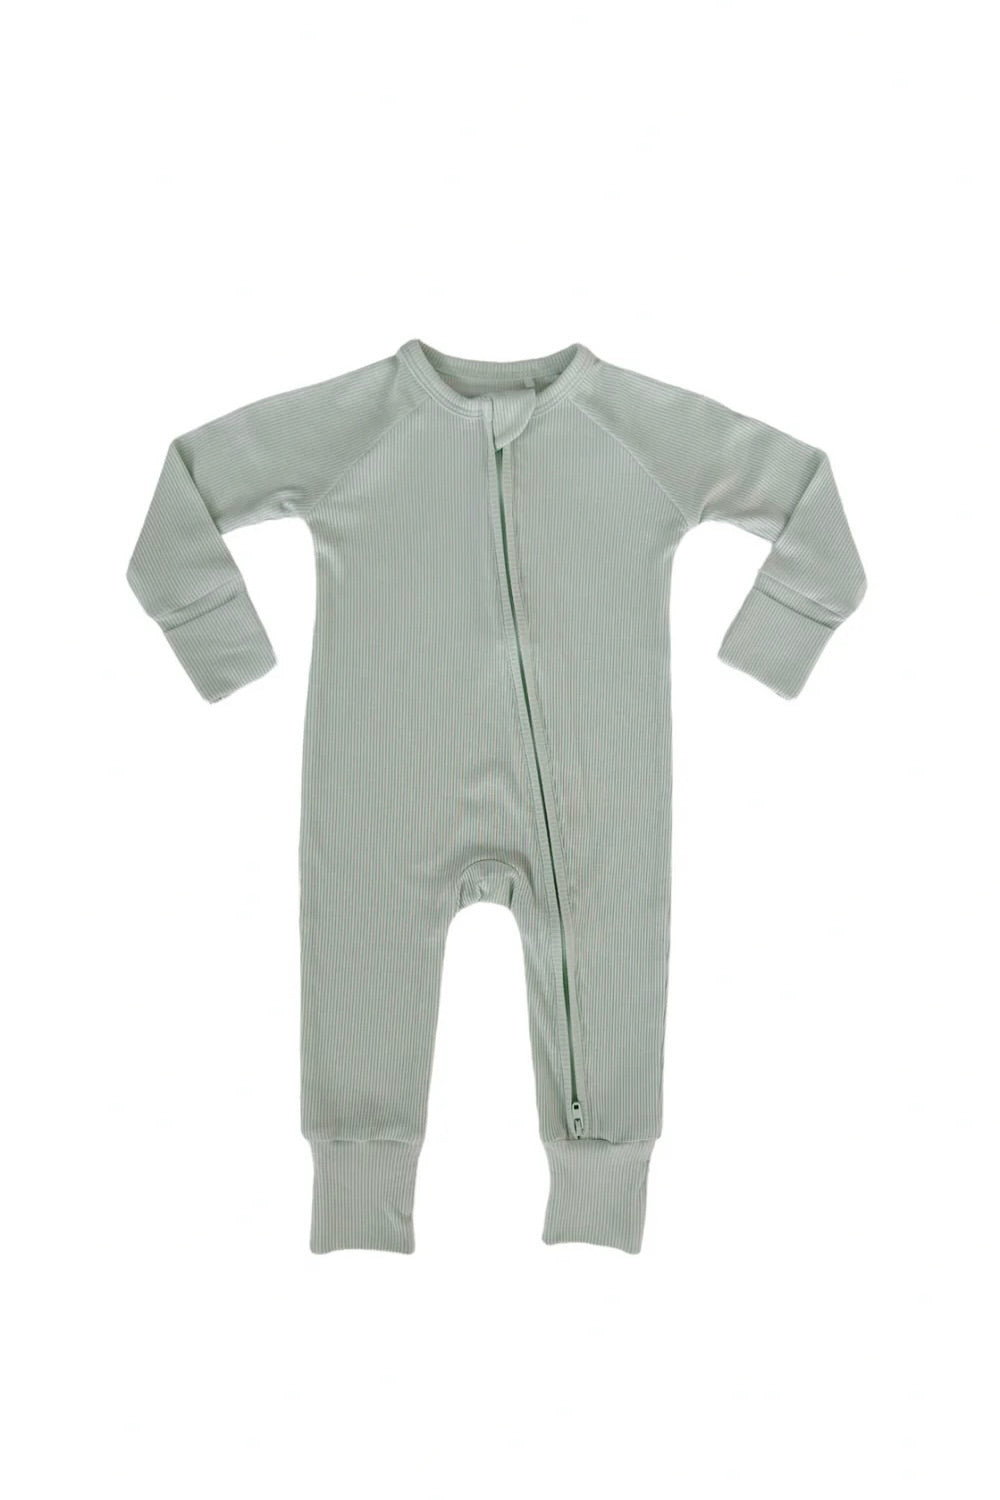 in my jammers Morning Mist Ribbed Zipper Romper